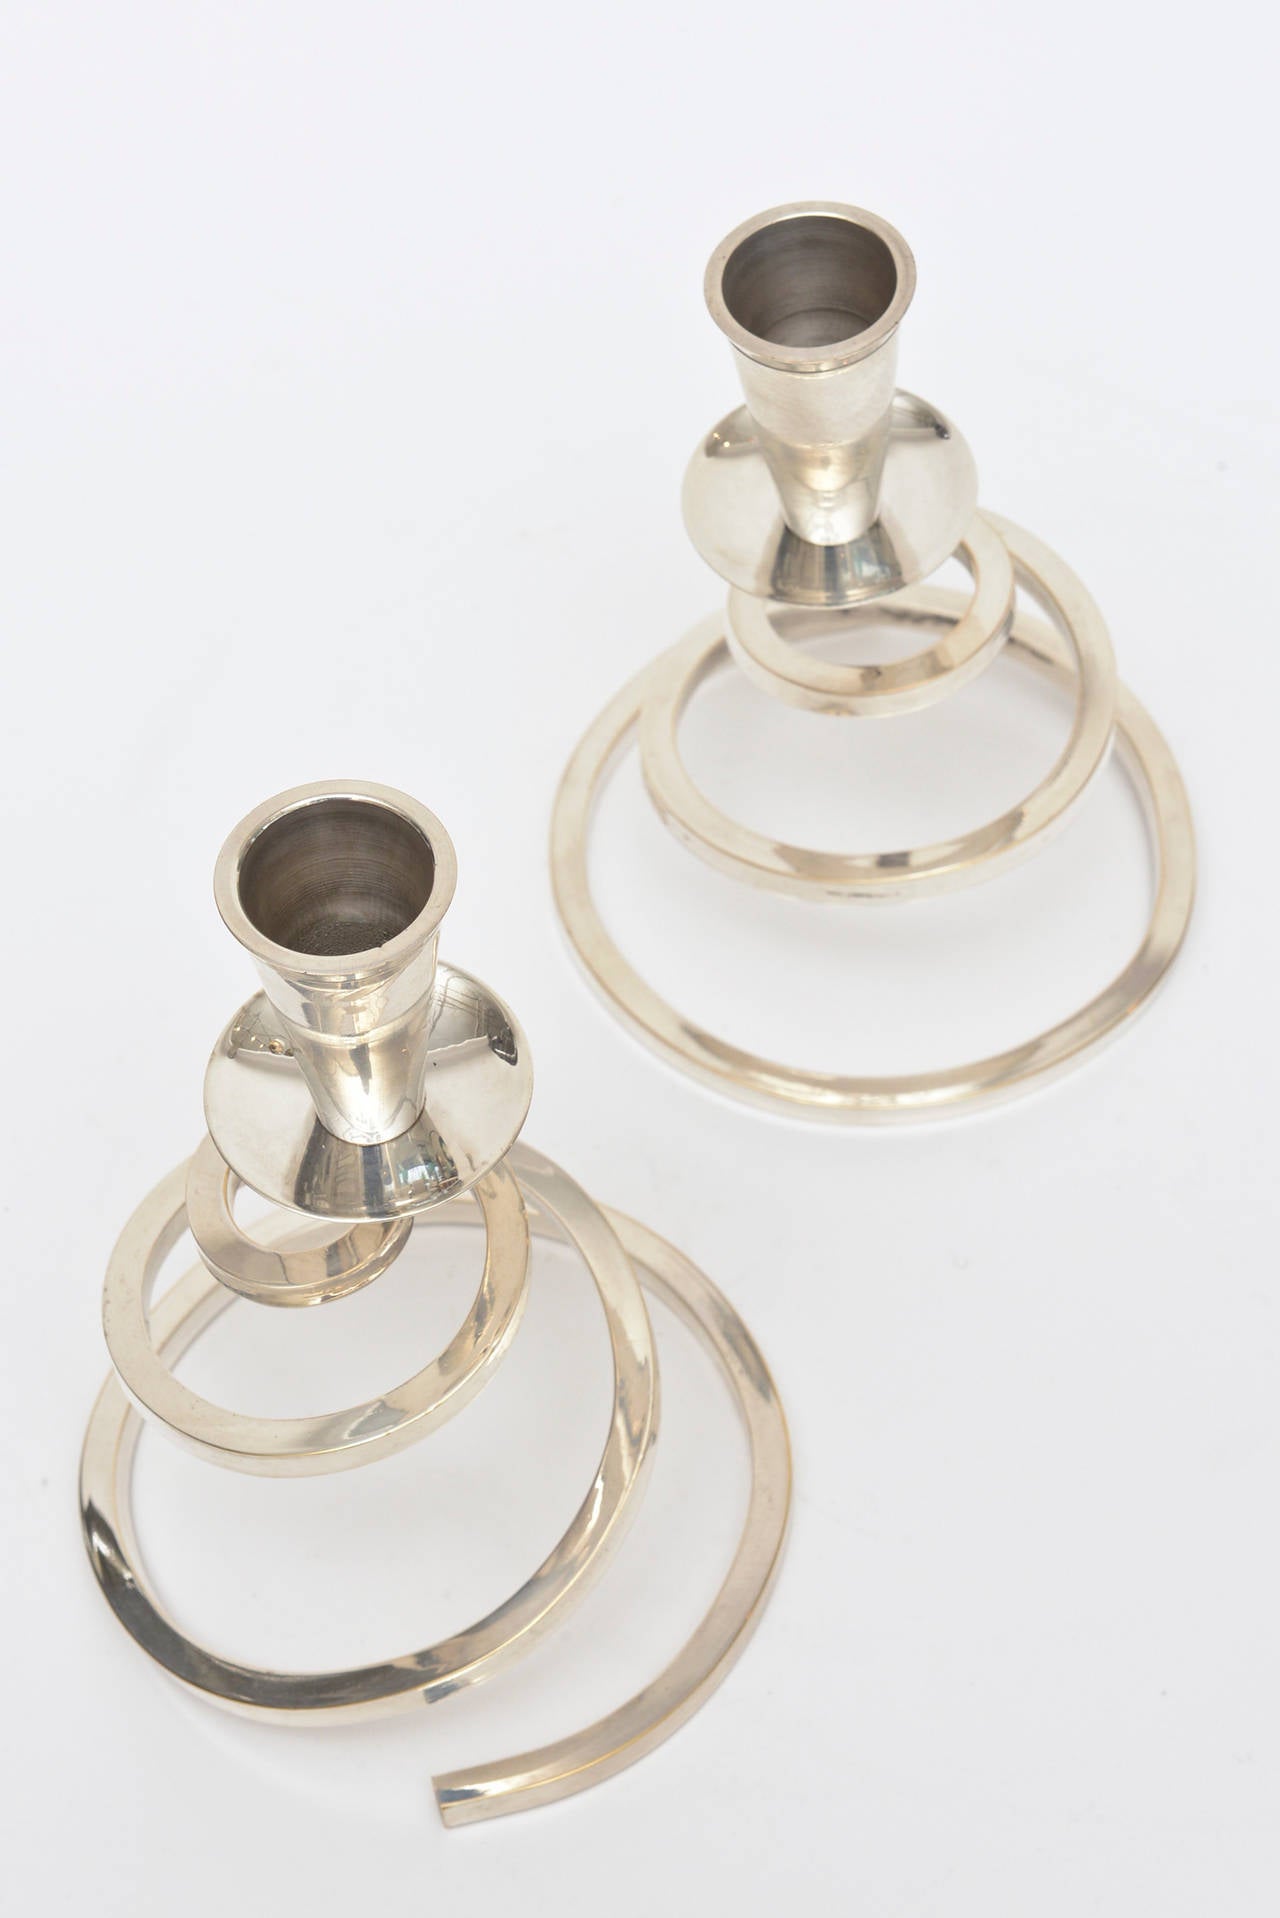 American Pair of Chrome-Plated Brass Coil Spiral Candlesticks